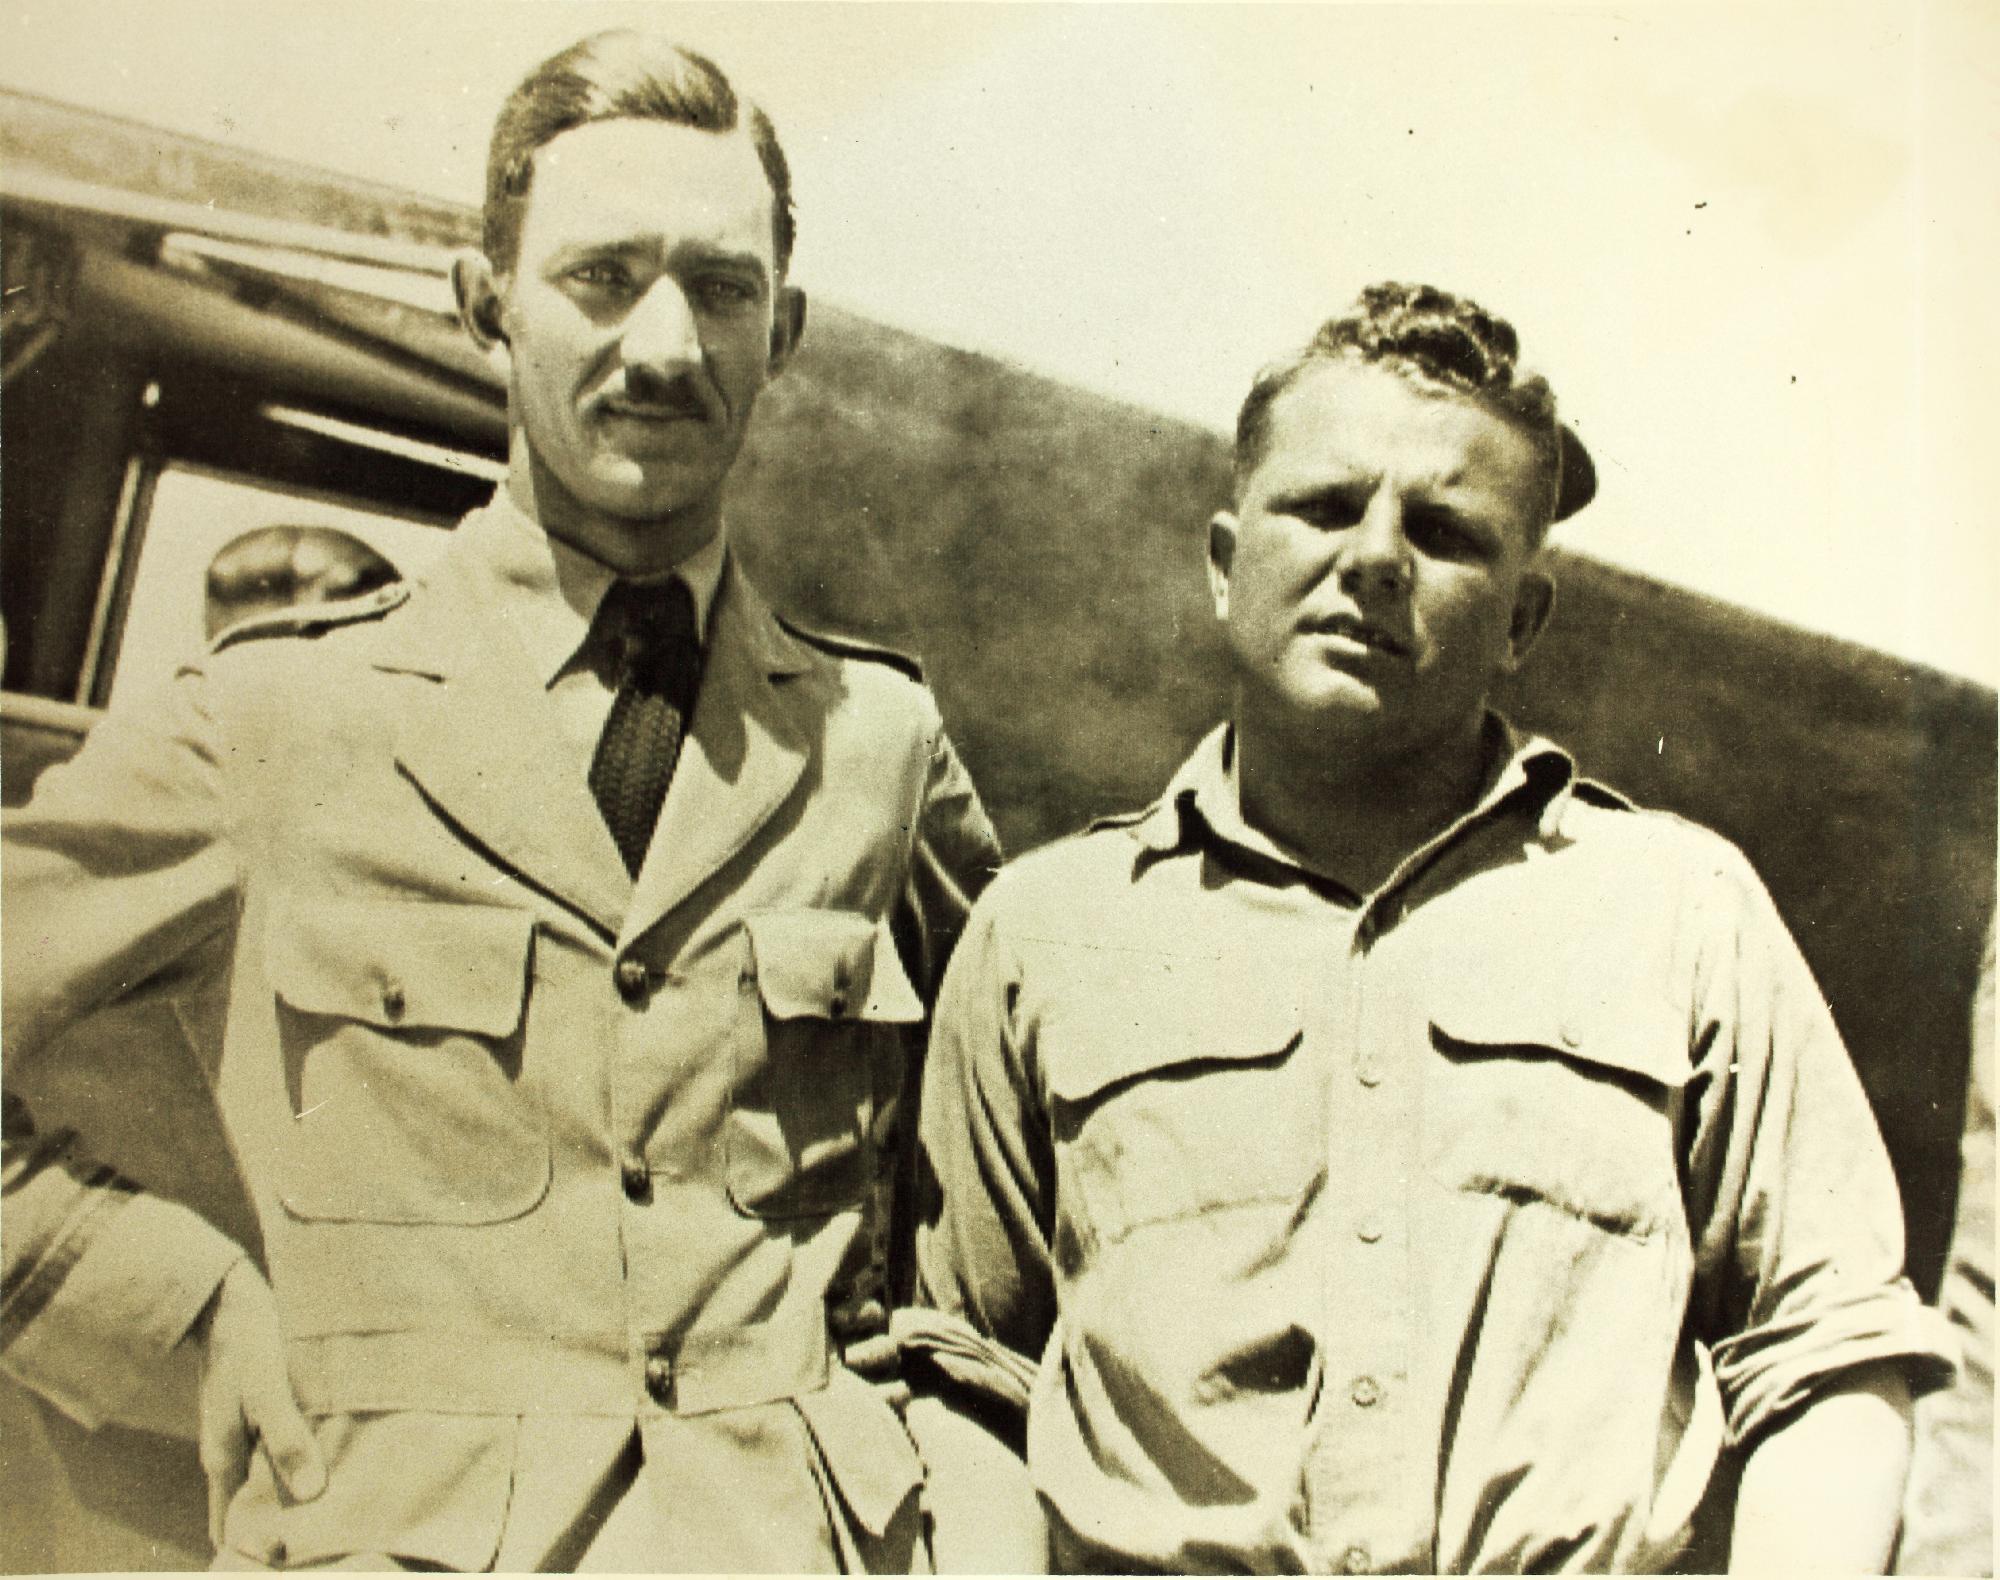 Lieutenant (j.g) George D. Covell, U.S. navy, and Lieutenat R.S. Waggener, U.S. Navy, were killed when their airplane crashed in fog, 10 August 1927, while flying to Oakland to join the Dole Air Race. (San Diego Air and Space Museum Archives)